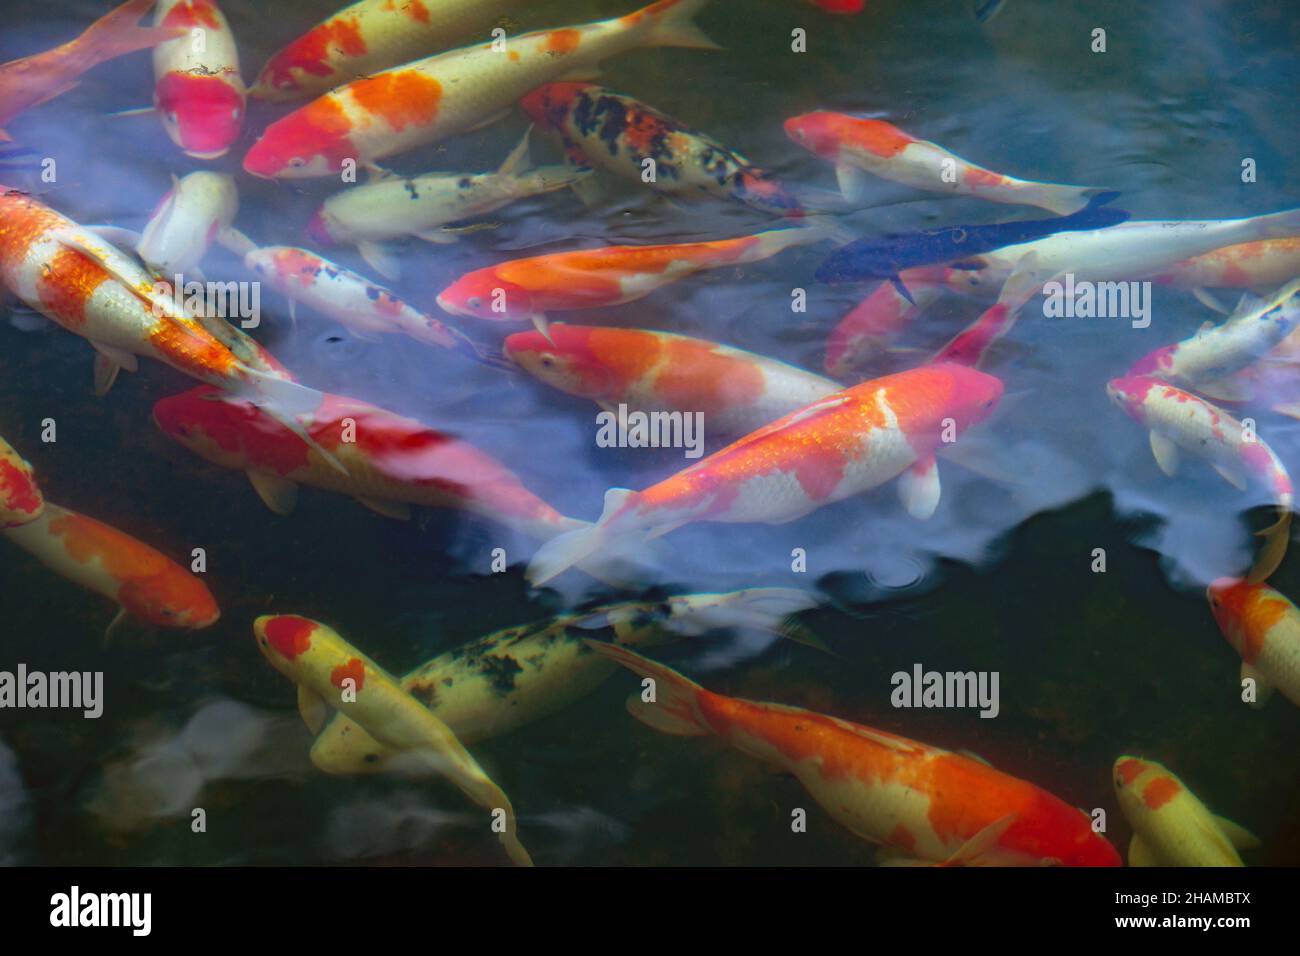 Japan Koi fish or Fancy Carp under water in garden pond. An important element of Feng Shui in Japanese culture. Photo with blur in motion. Stock Photo